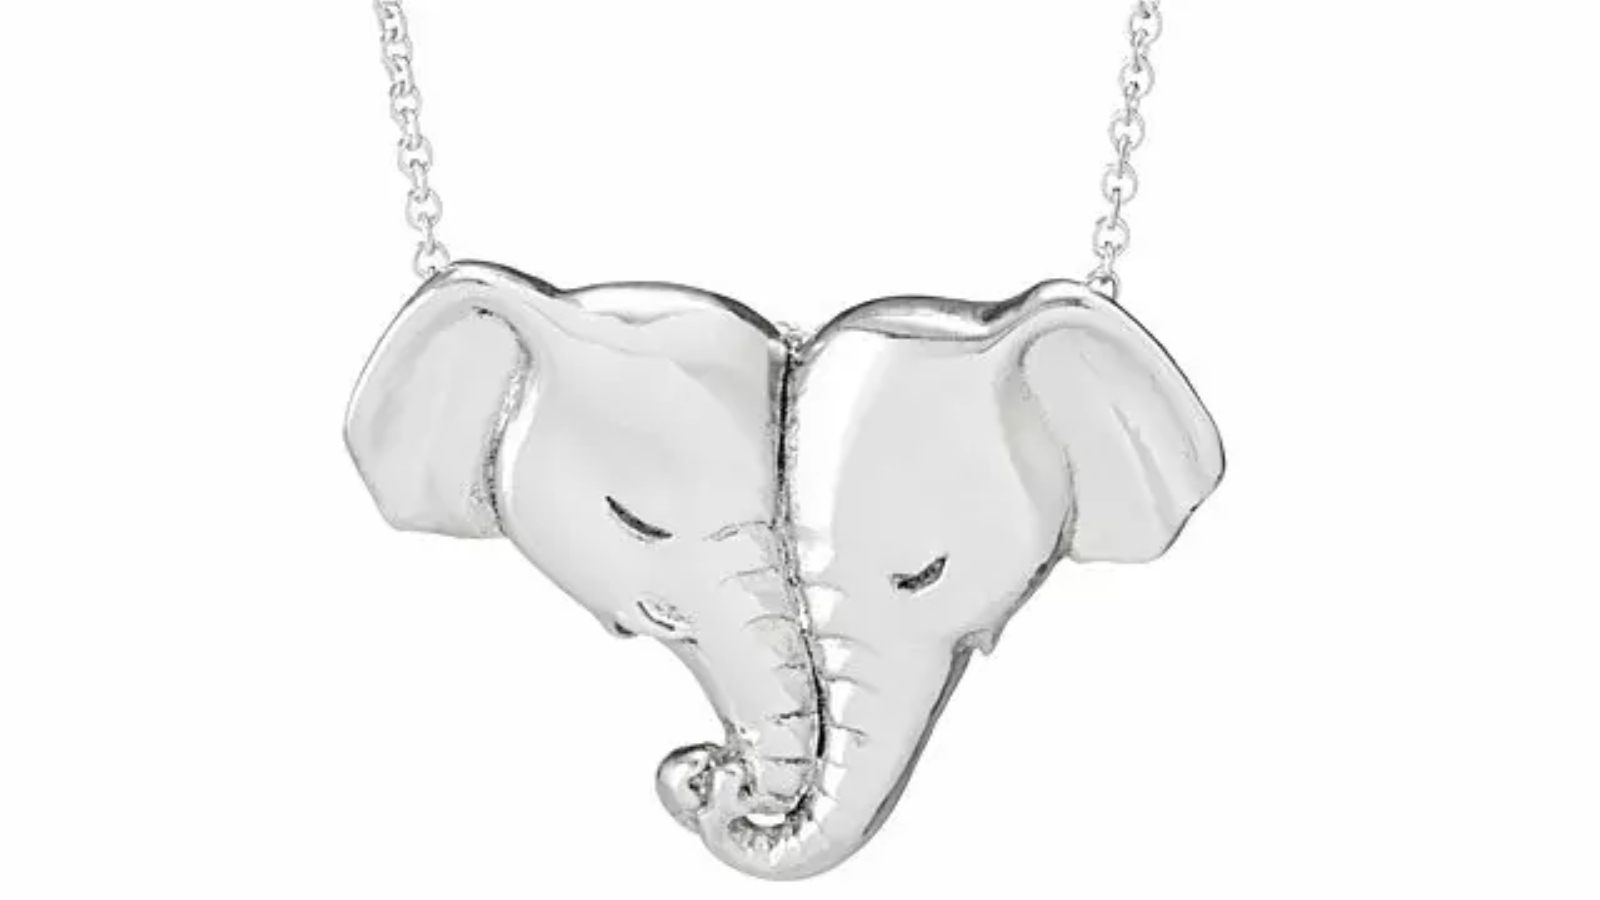 necklace featuring elephants entwined by their trunks, symbolizing love